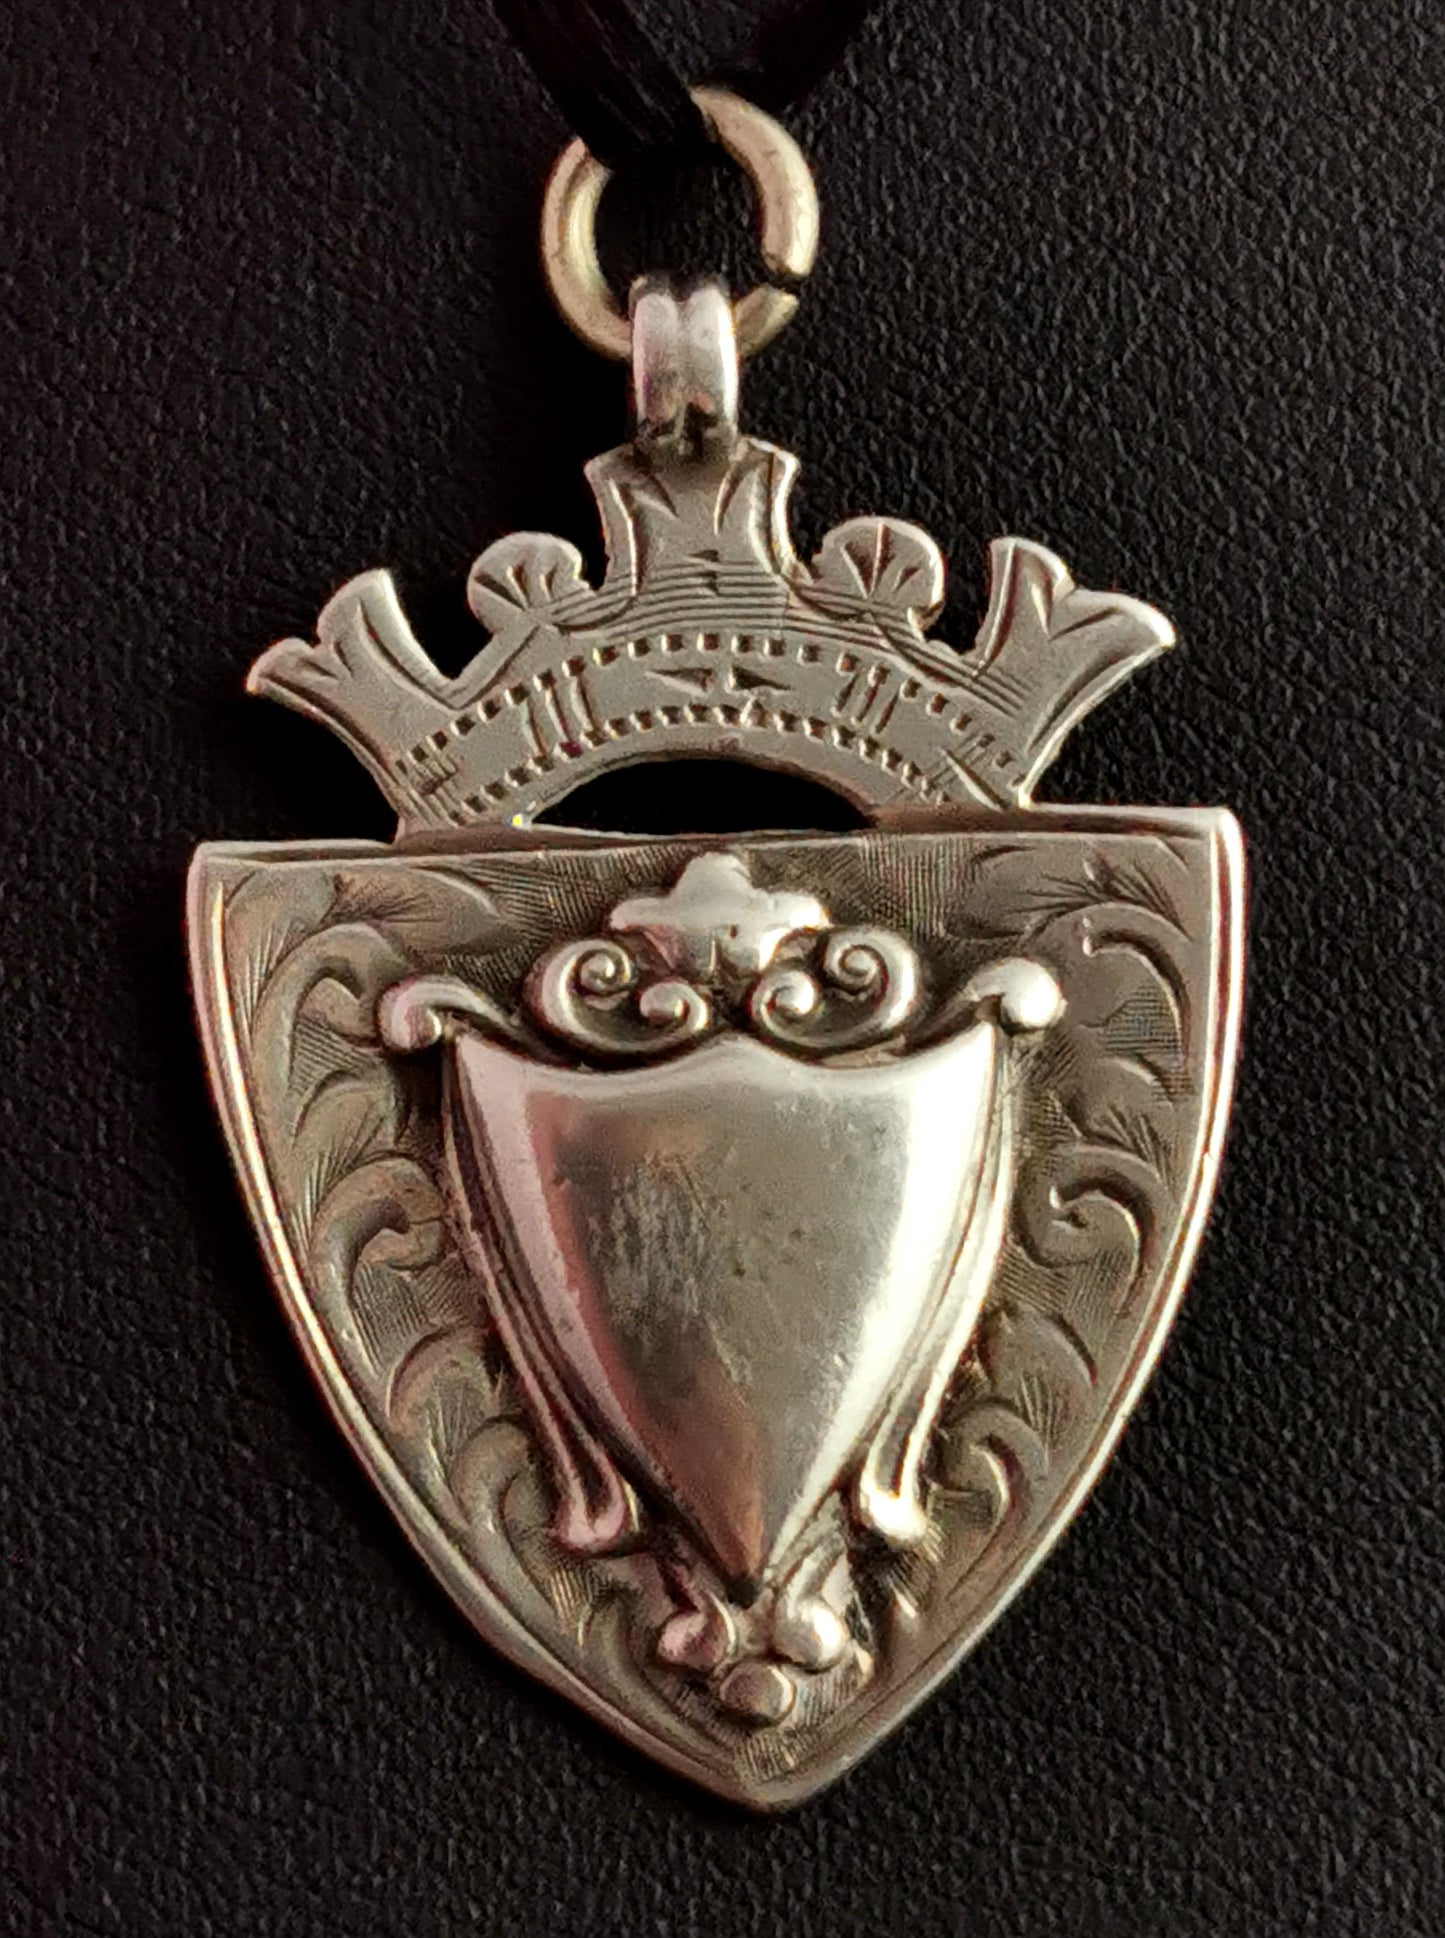 Antique silver shield fob, watch fob pendant